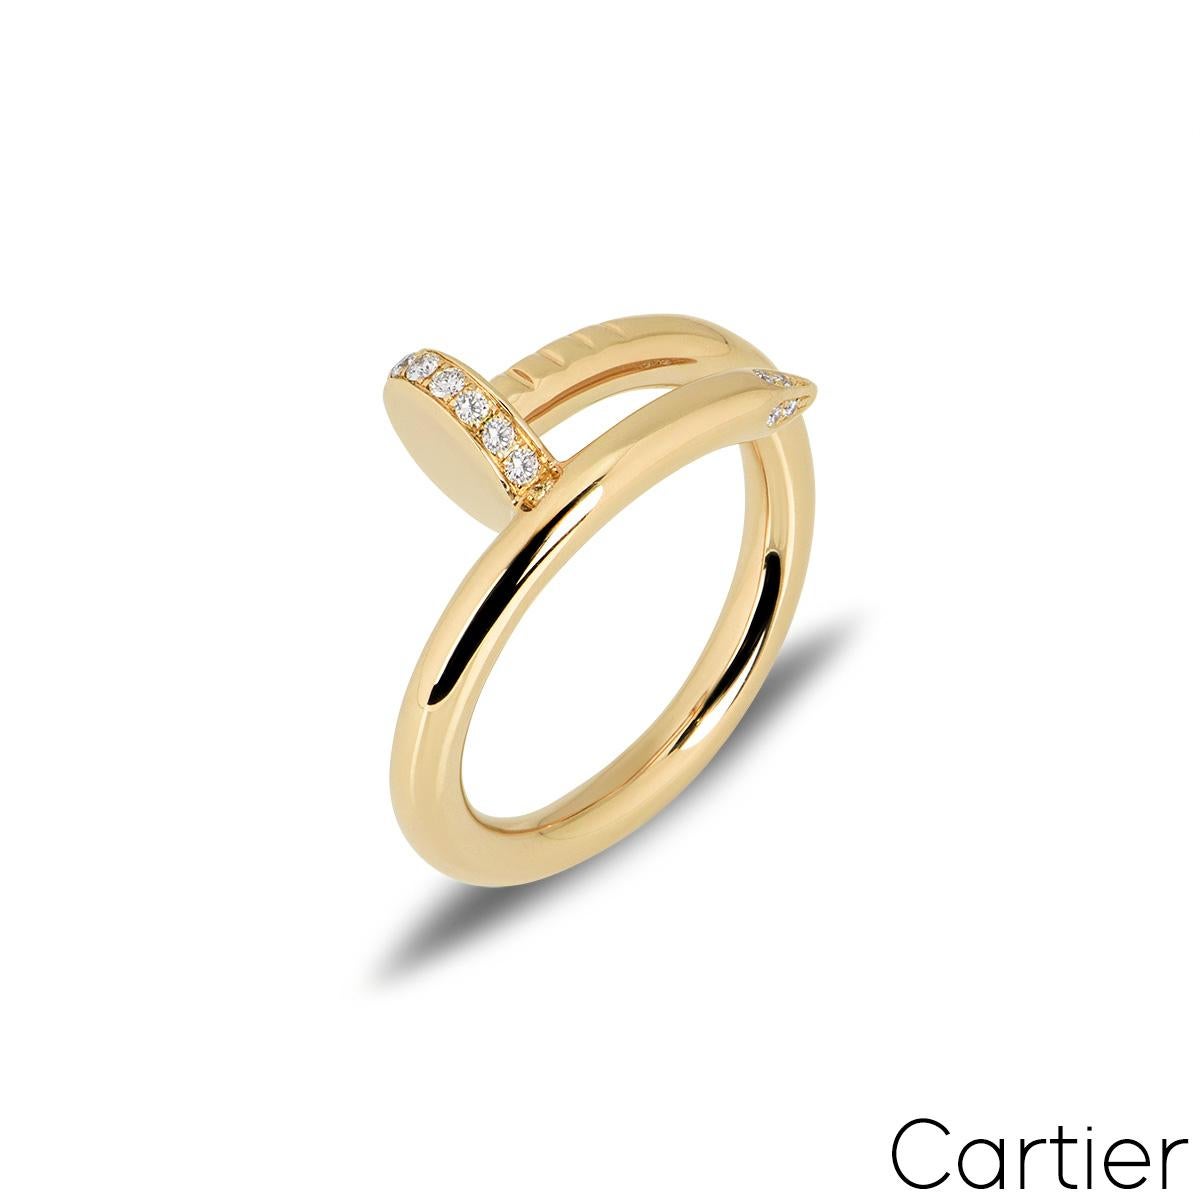 A stylish 18k yellow gold Cartier diamond ring from the Juste Un Clou collection. The ring is in the style of a nail and has 22 round brilliant cut diamonds pave set in the head and tip with a total weight of 0.13ct. The ring is size 48 and has a